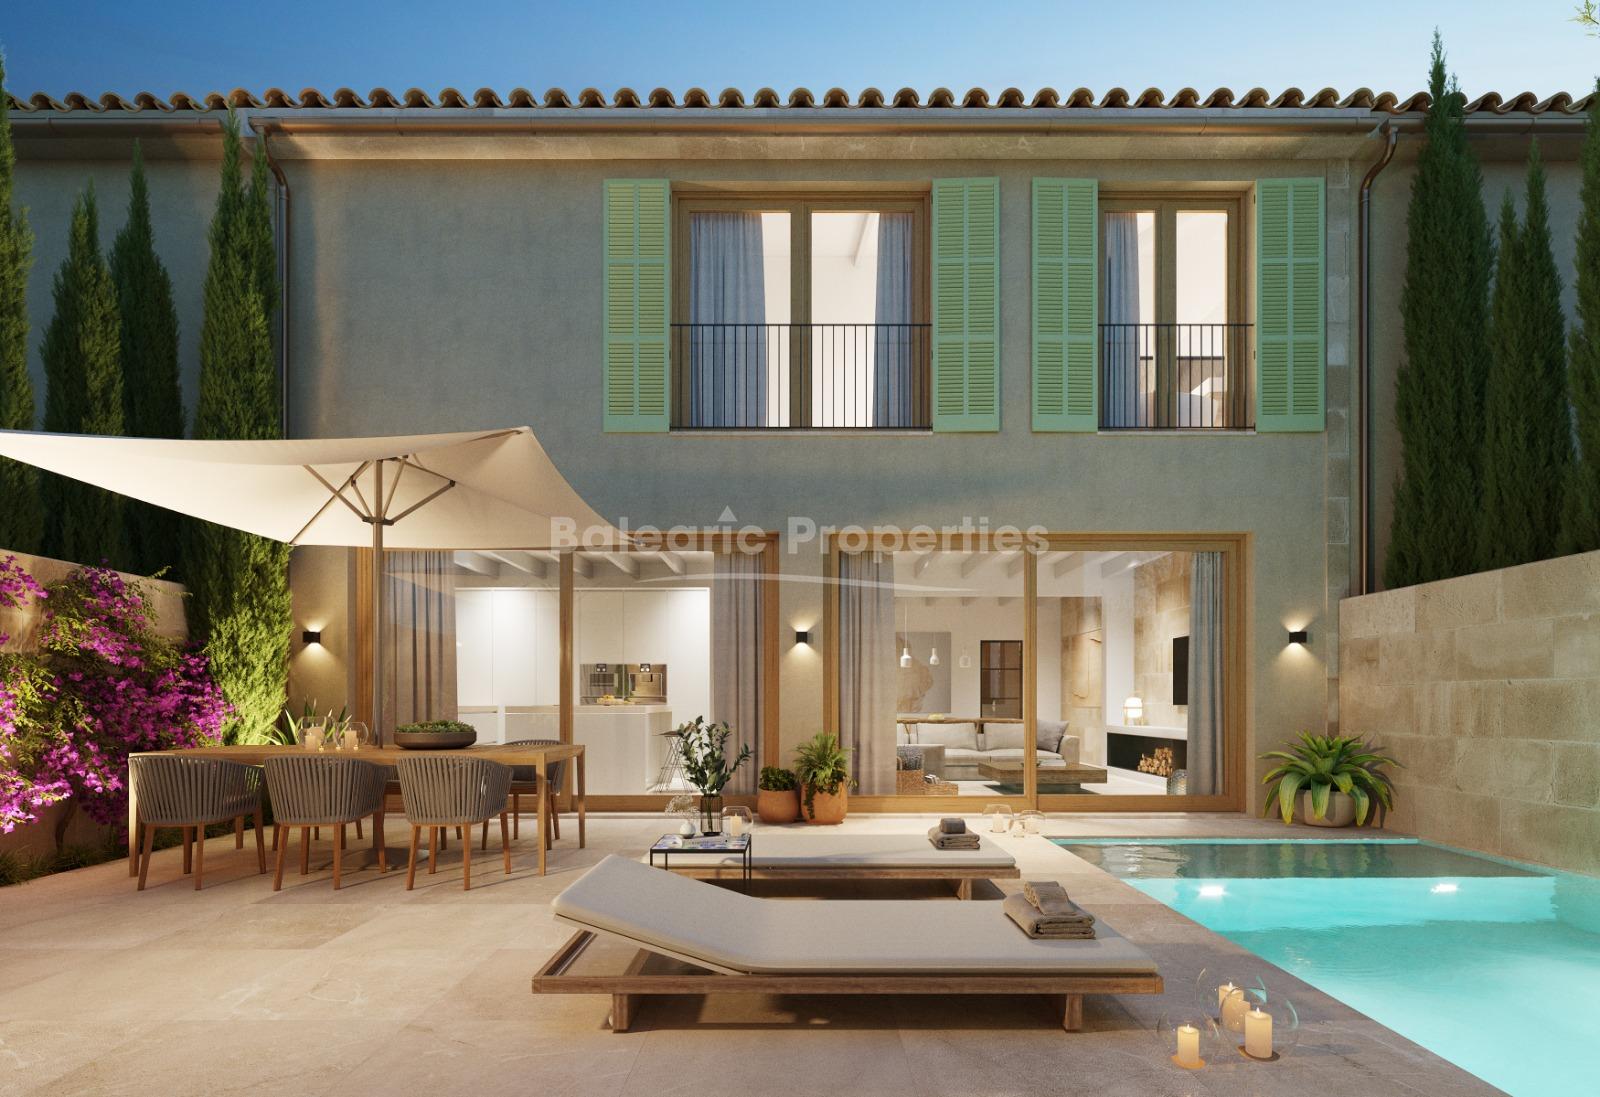 Elegant townhouse under construction in the heart of Ses Salines, Mallorca